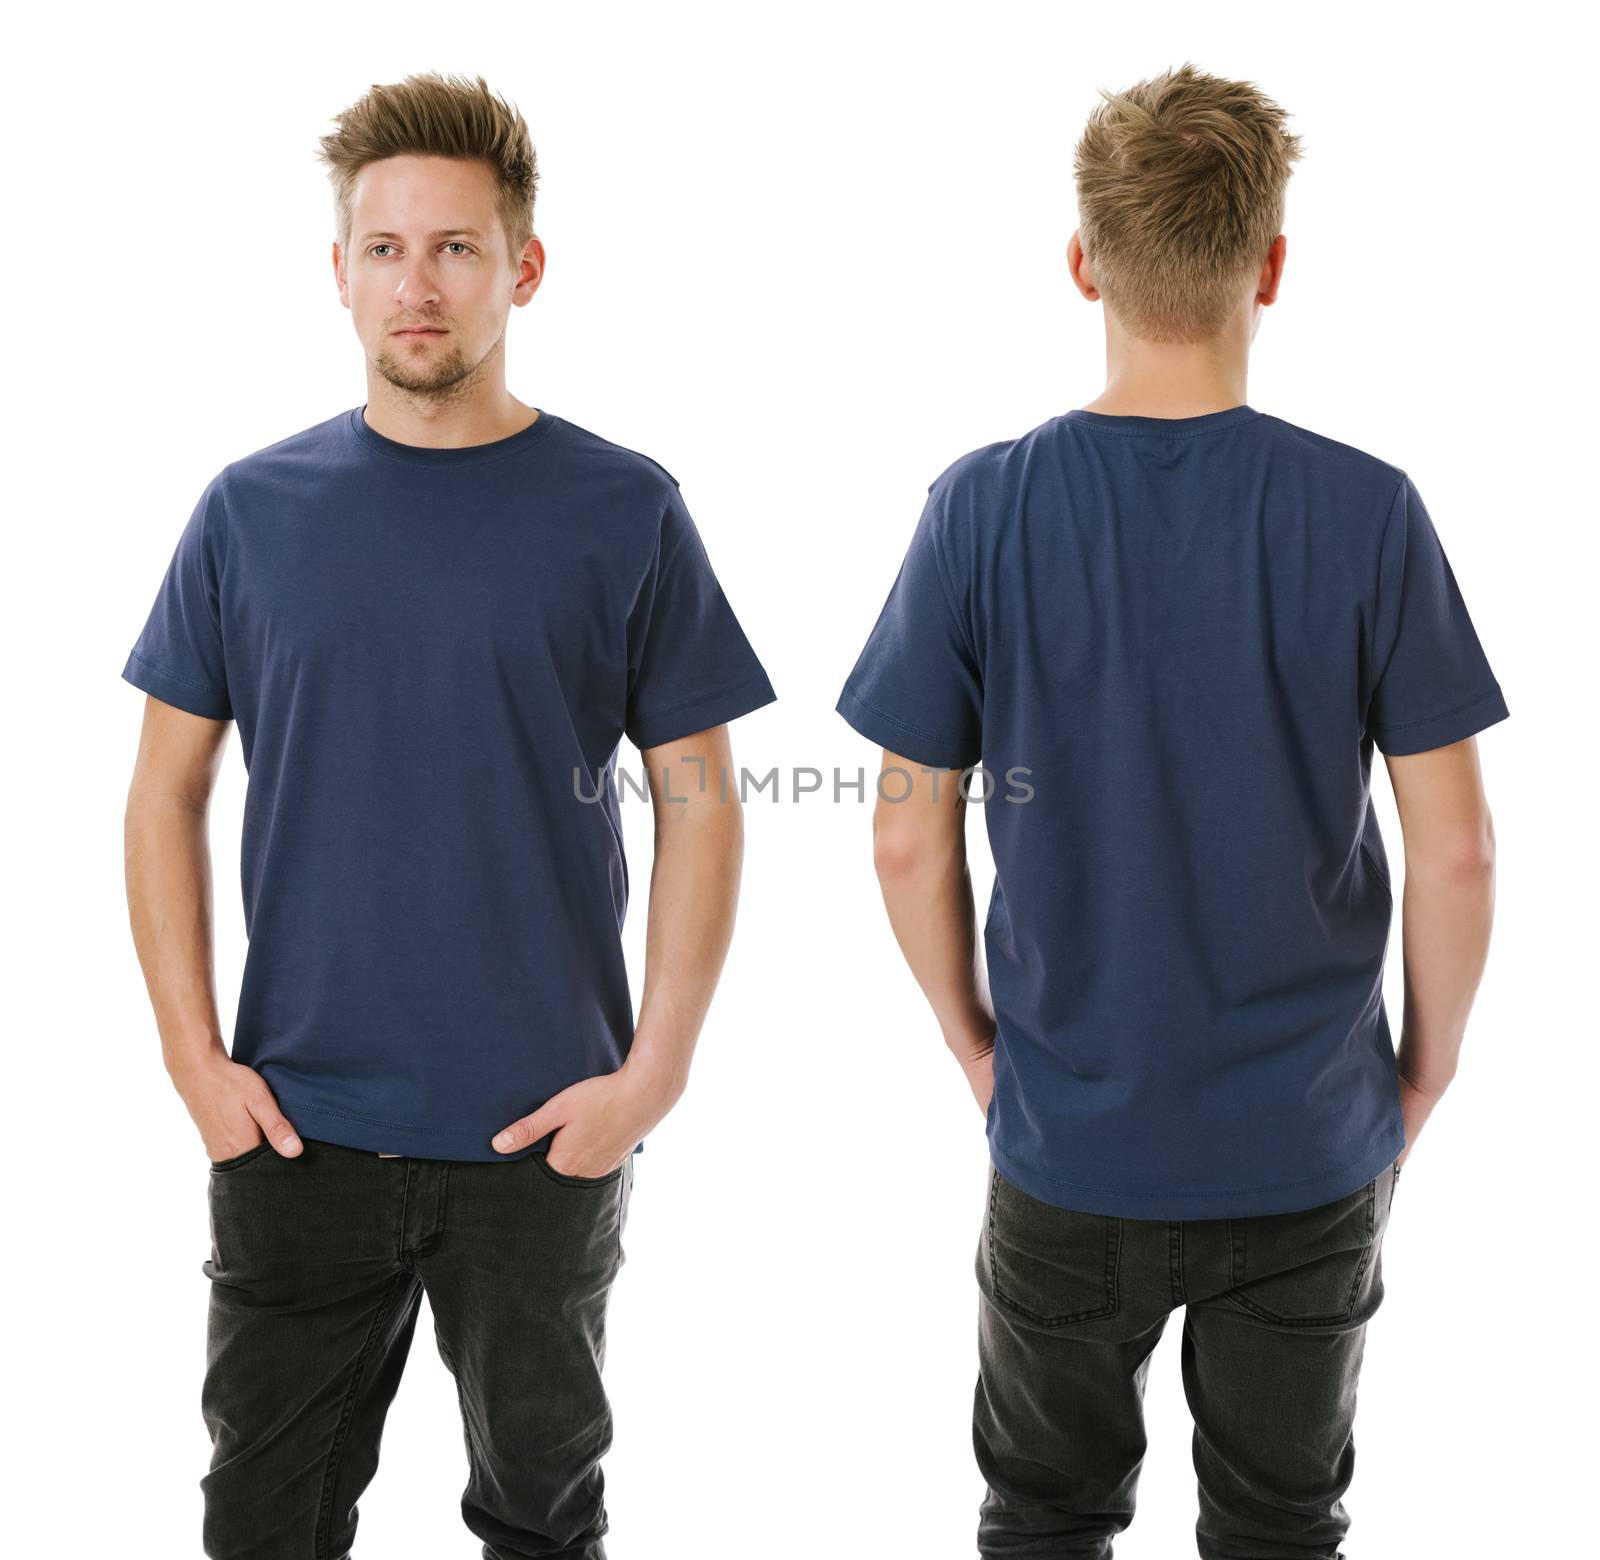 Man posing with blank navy blue shirt by sumners